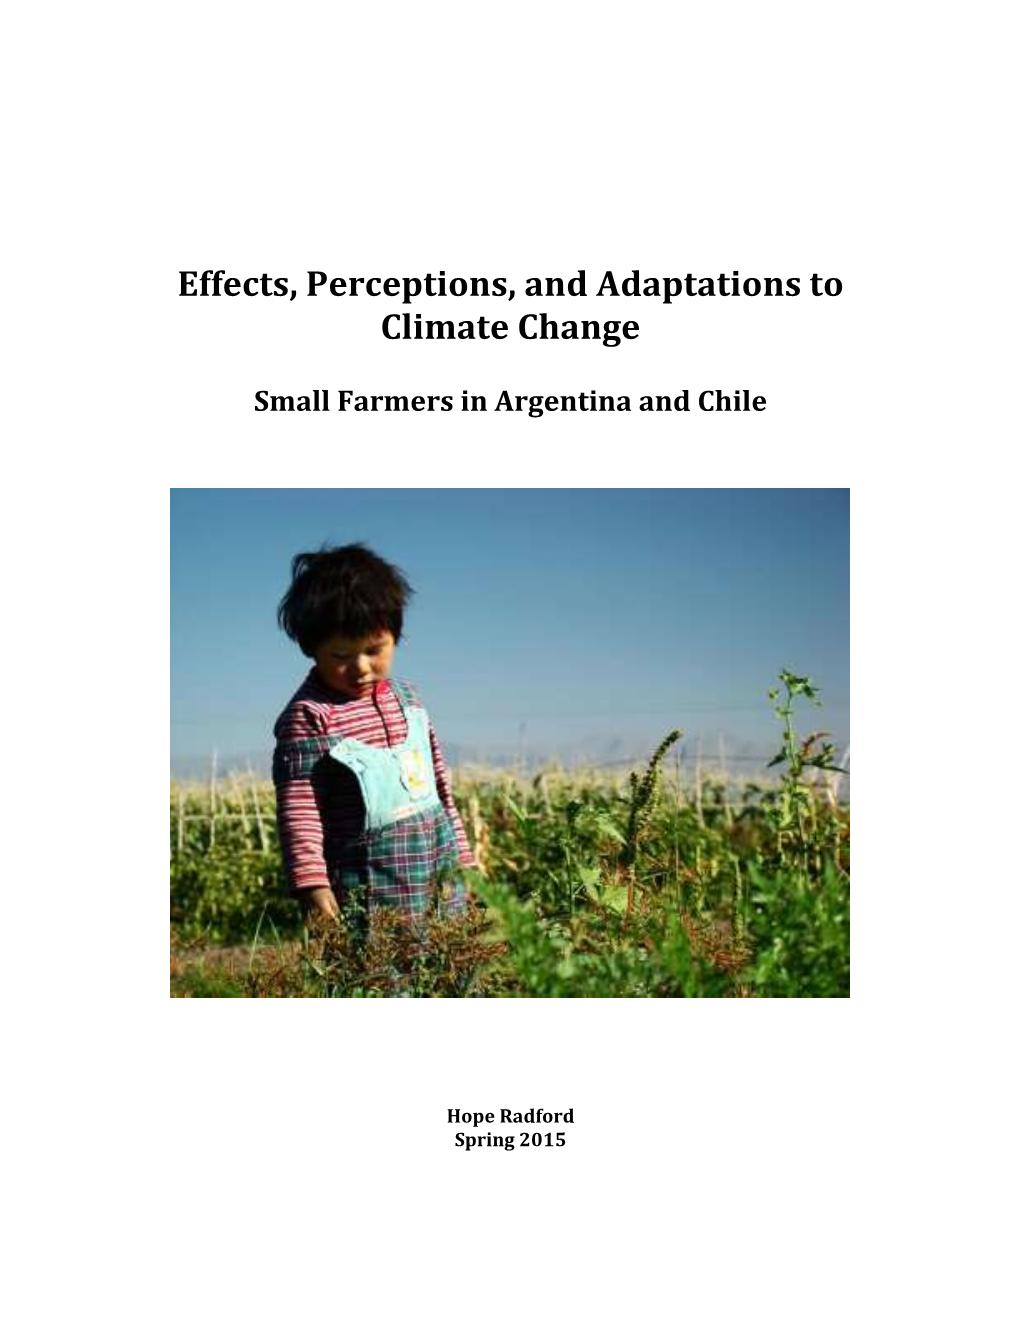 Effects, Perceptions, and Adaptations to Climate Change